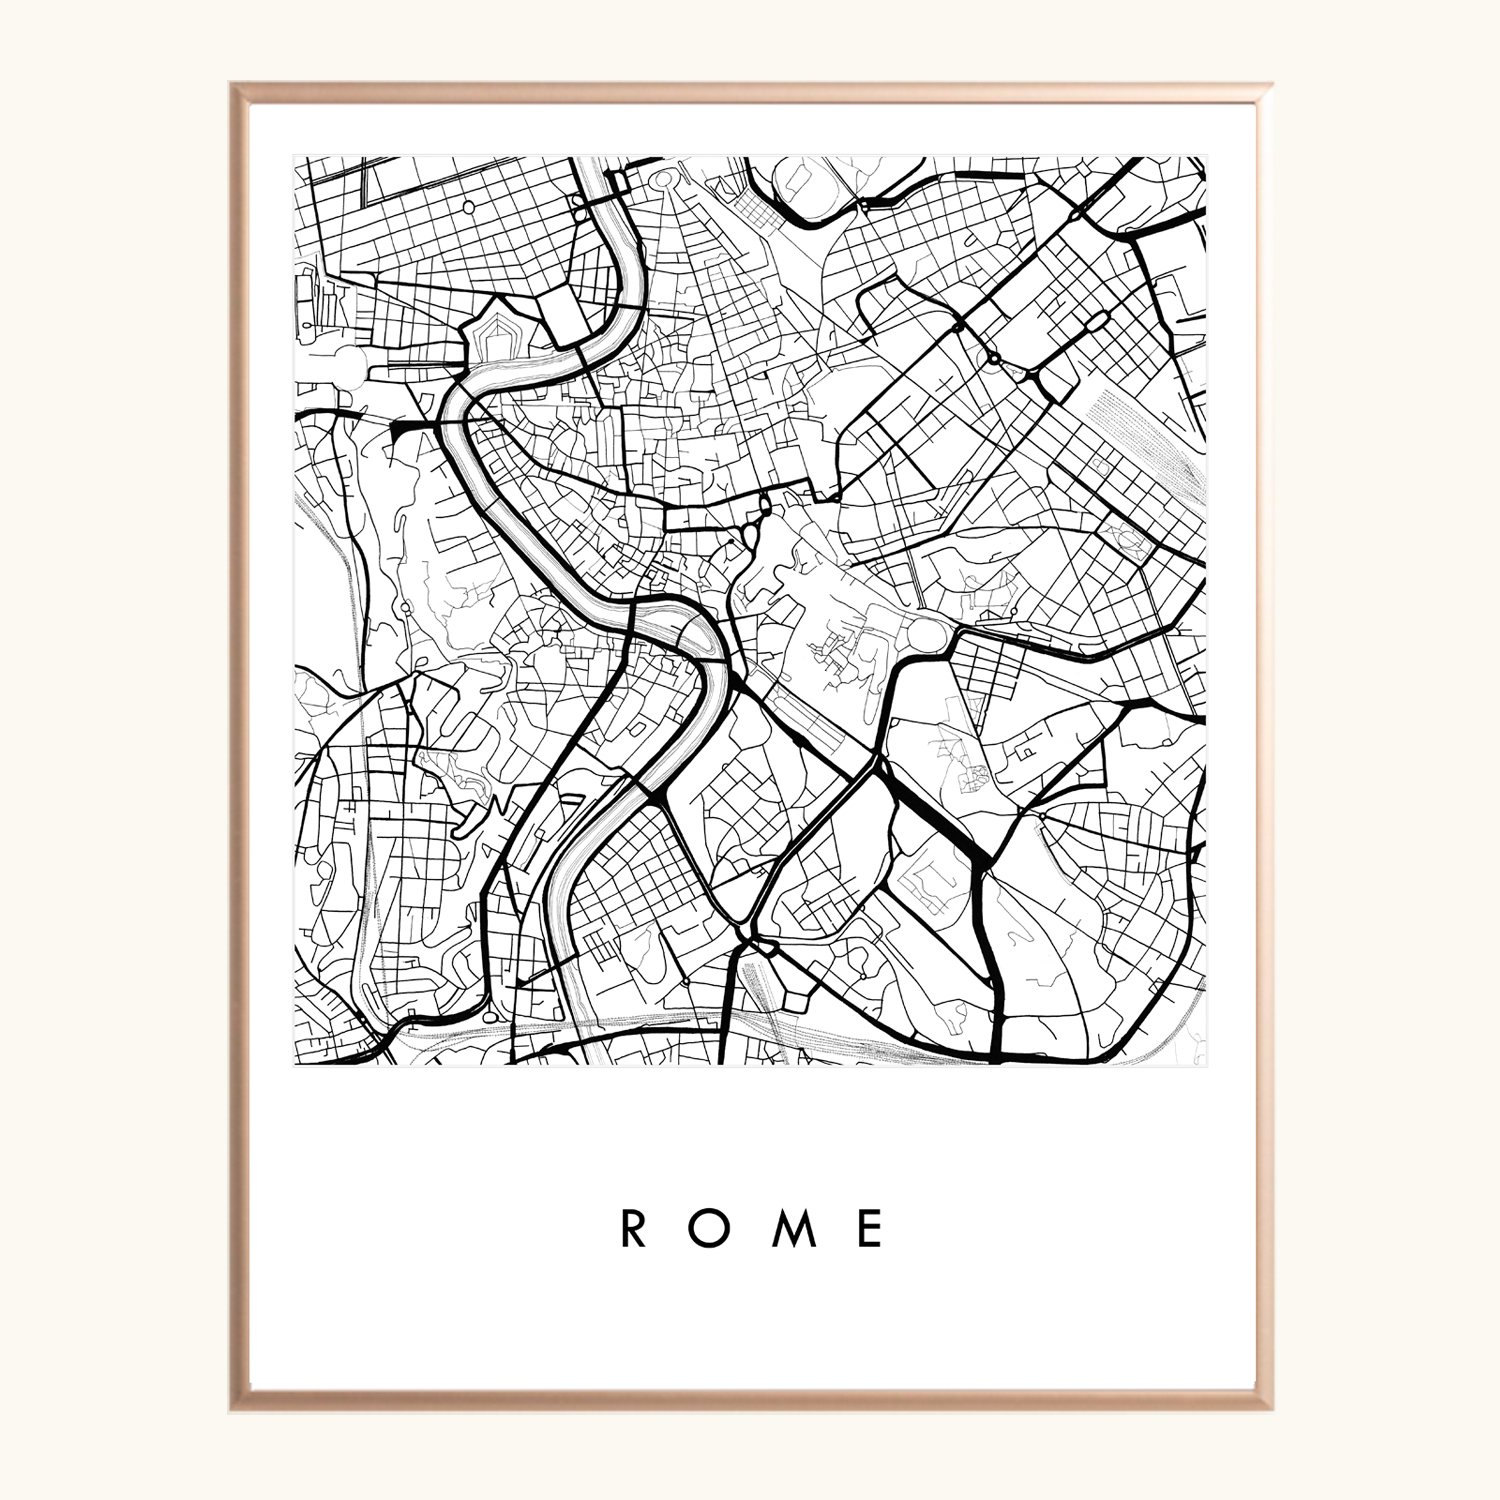 tøj Flagermus At hoppe ROME City Lines Map: PRINT — Turn-of-the-Centuries